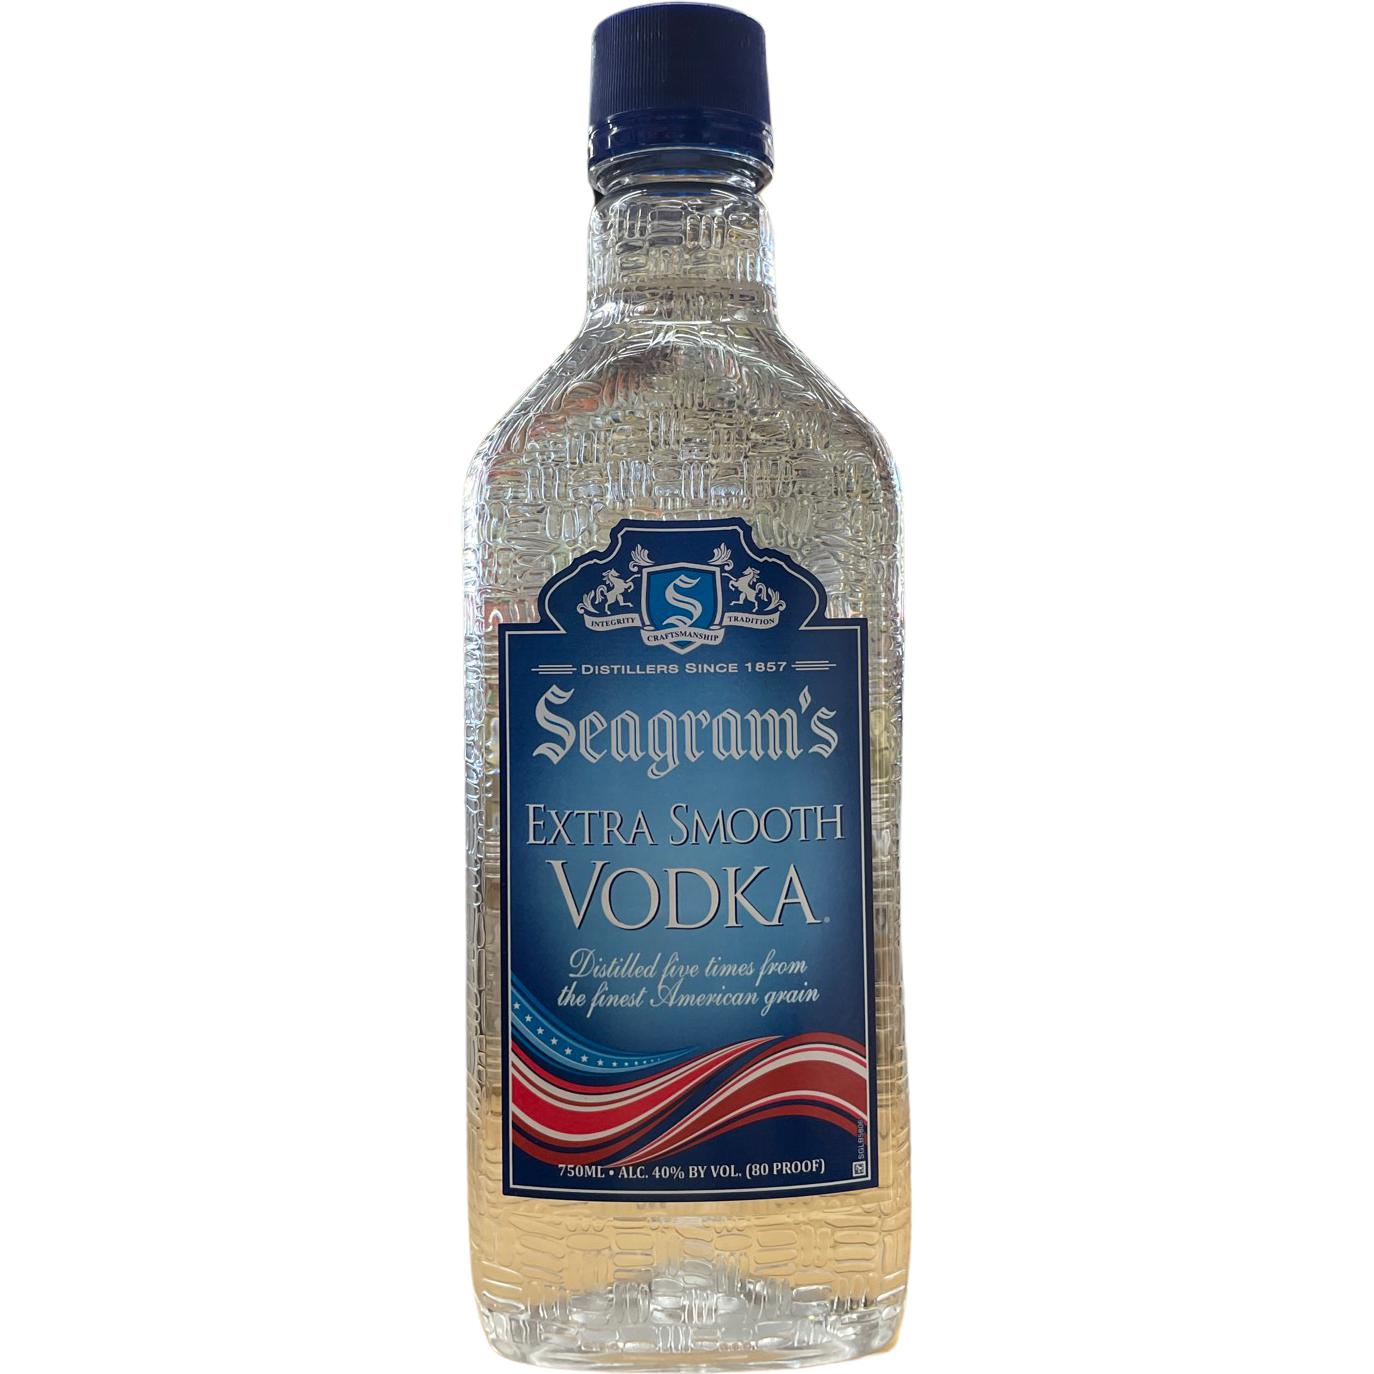 https://cdn.shopify.com/s/files/1/0508/7313/9356/products/Seagrams-Extra-Smooth-Vodka-750ml.jpg?v=1665181897